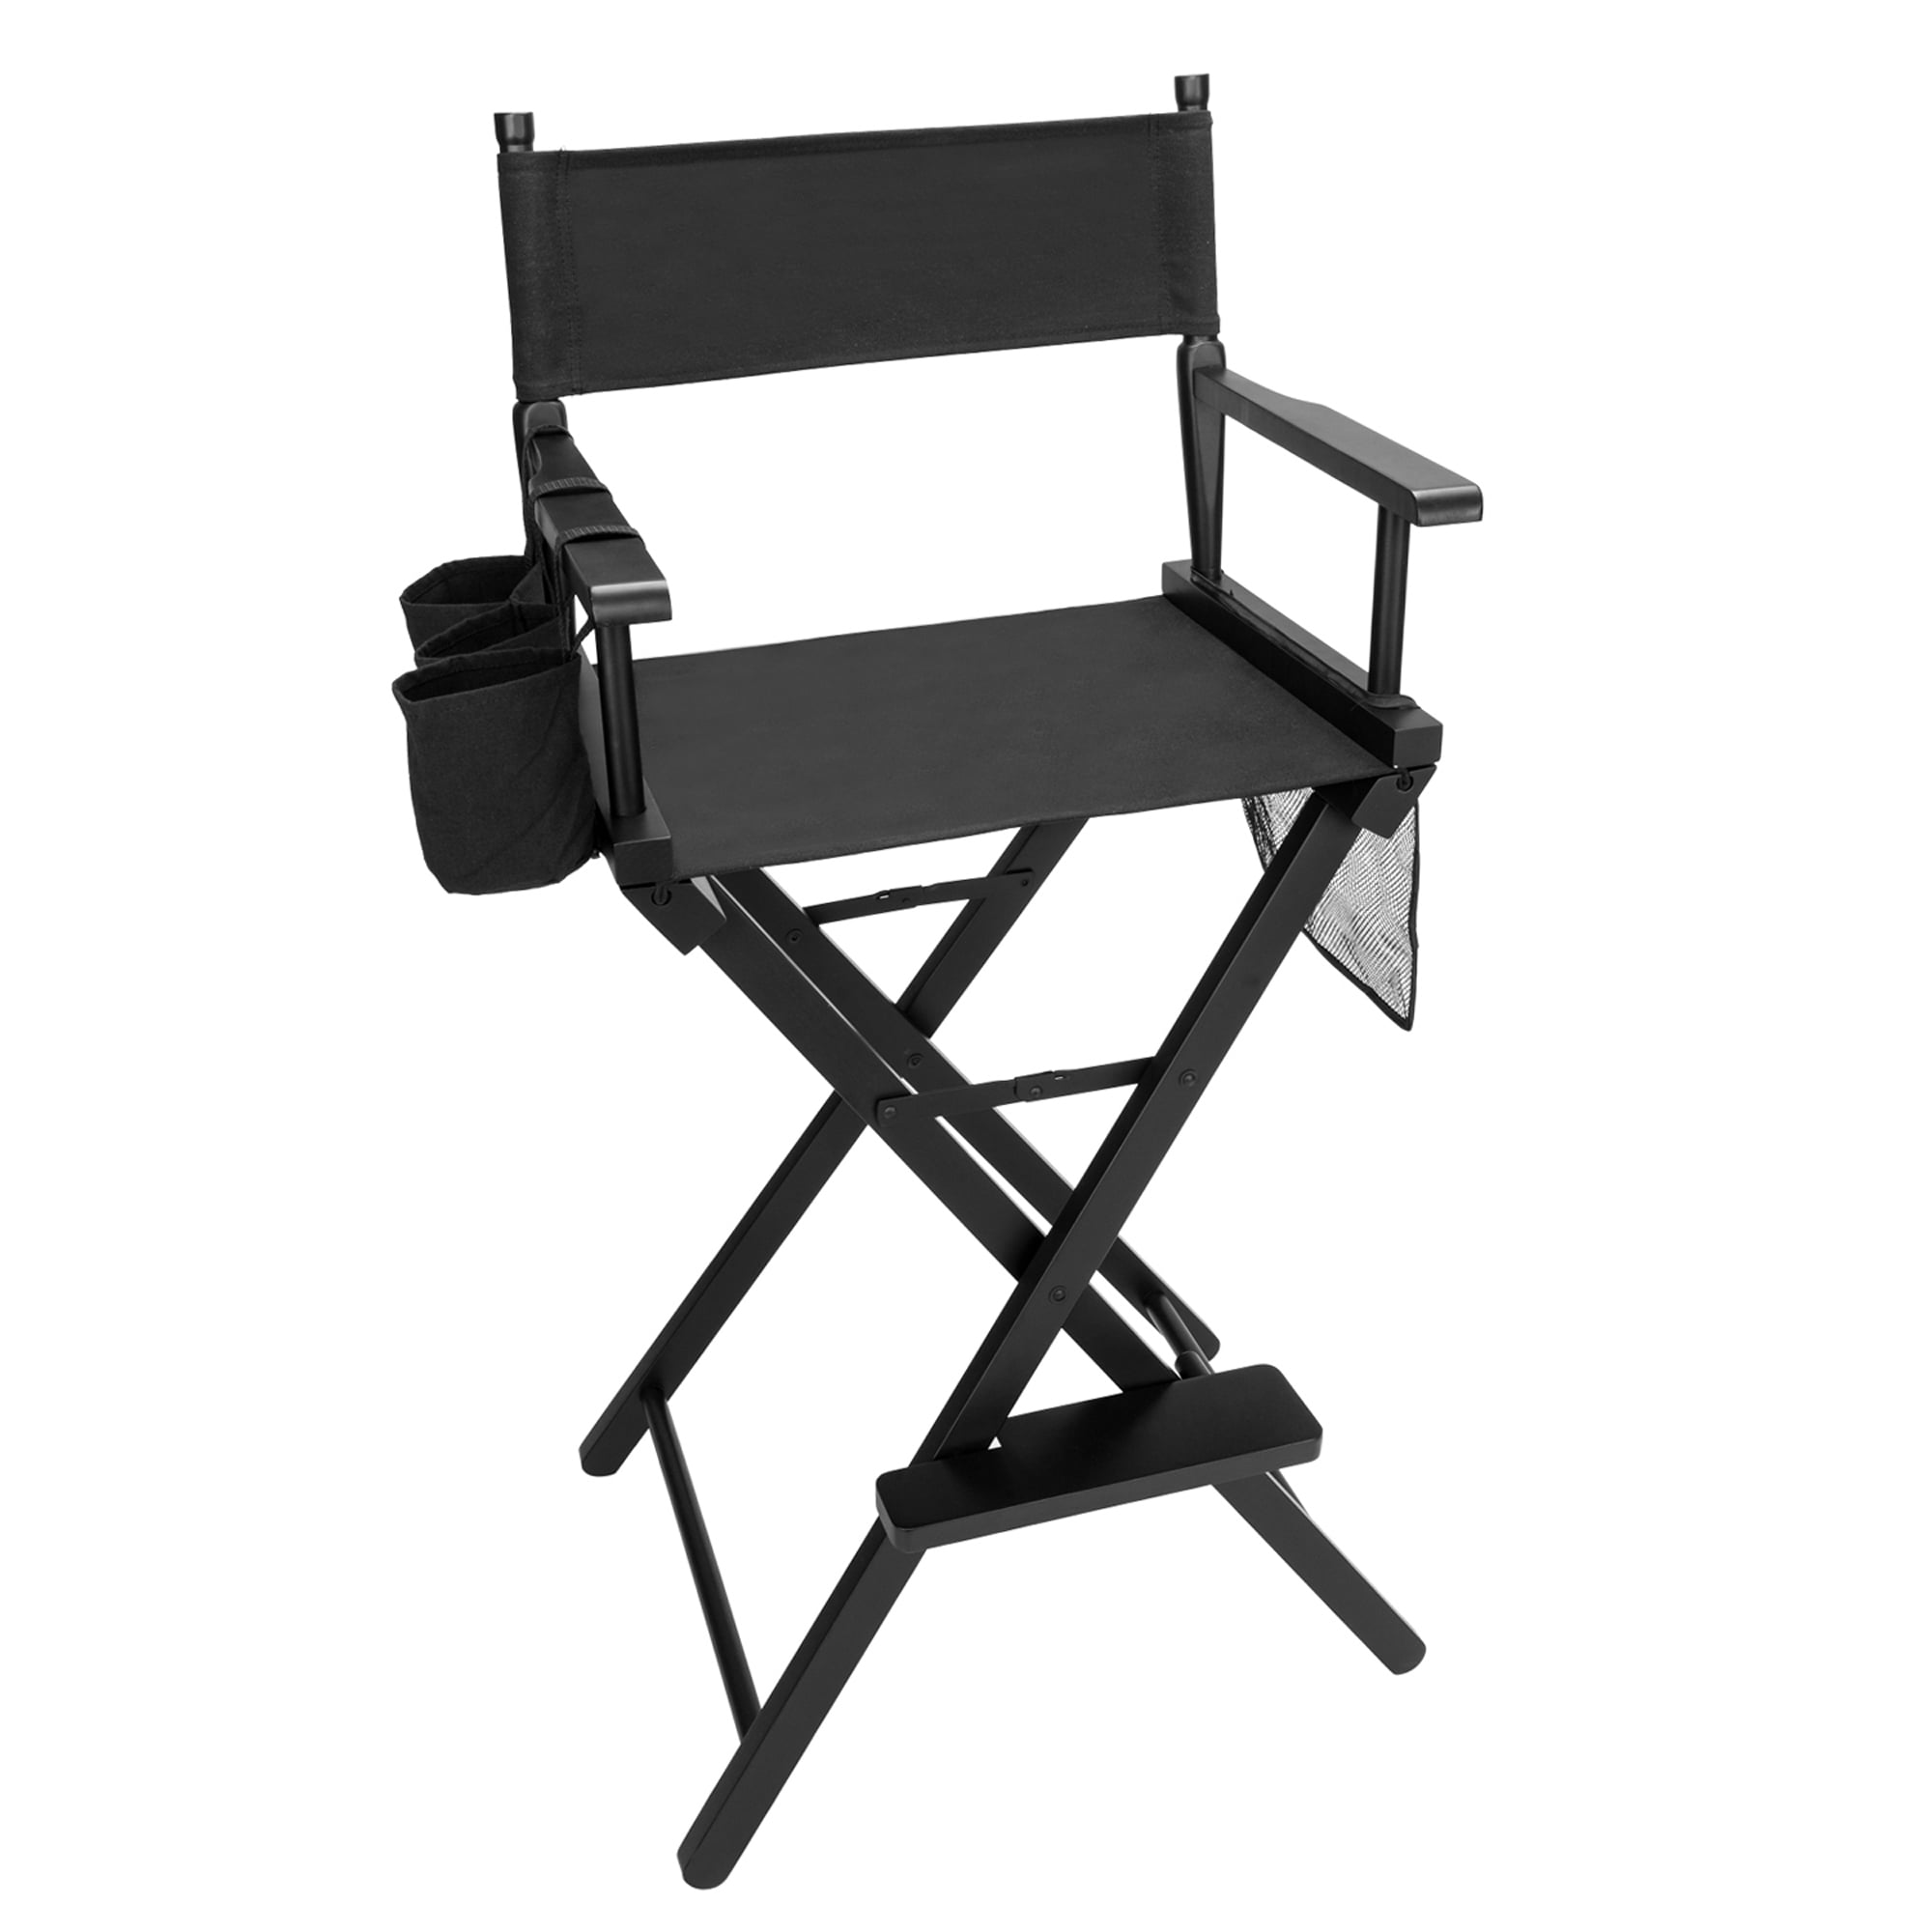 Folding Directors Chair, 2021 Newest Padded Tall Director Chair with